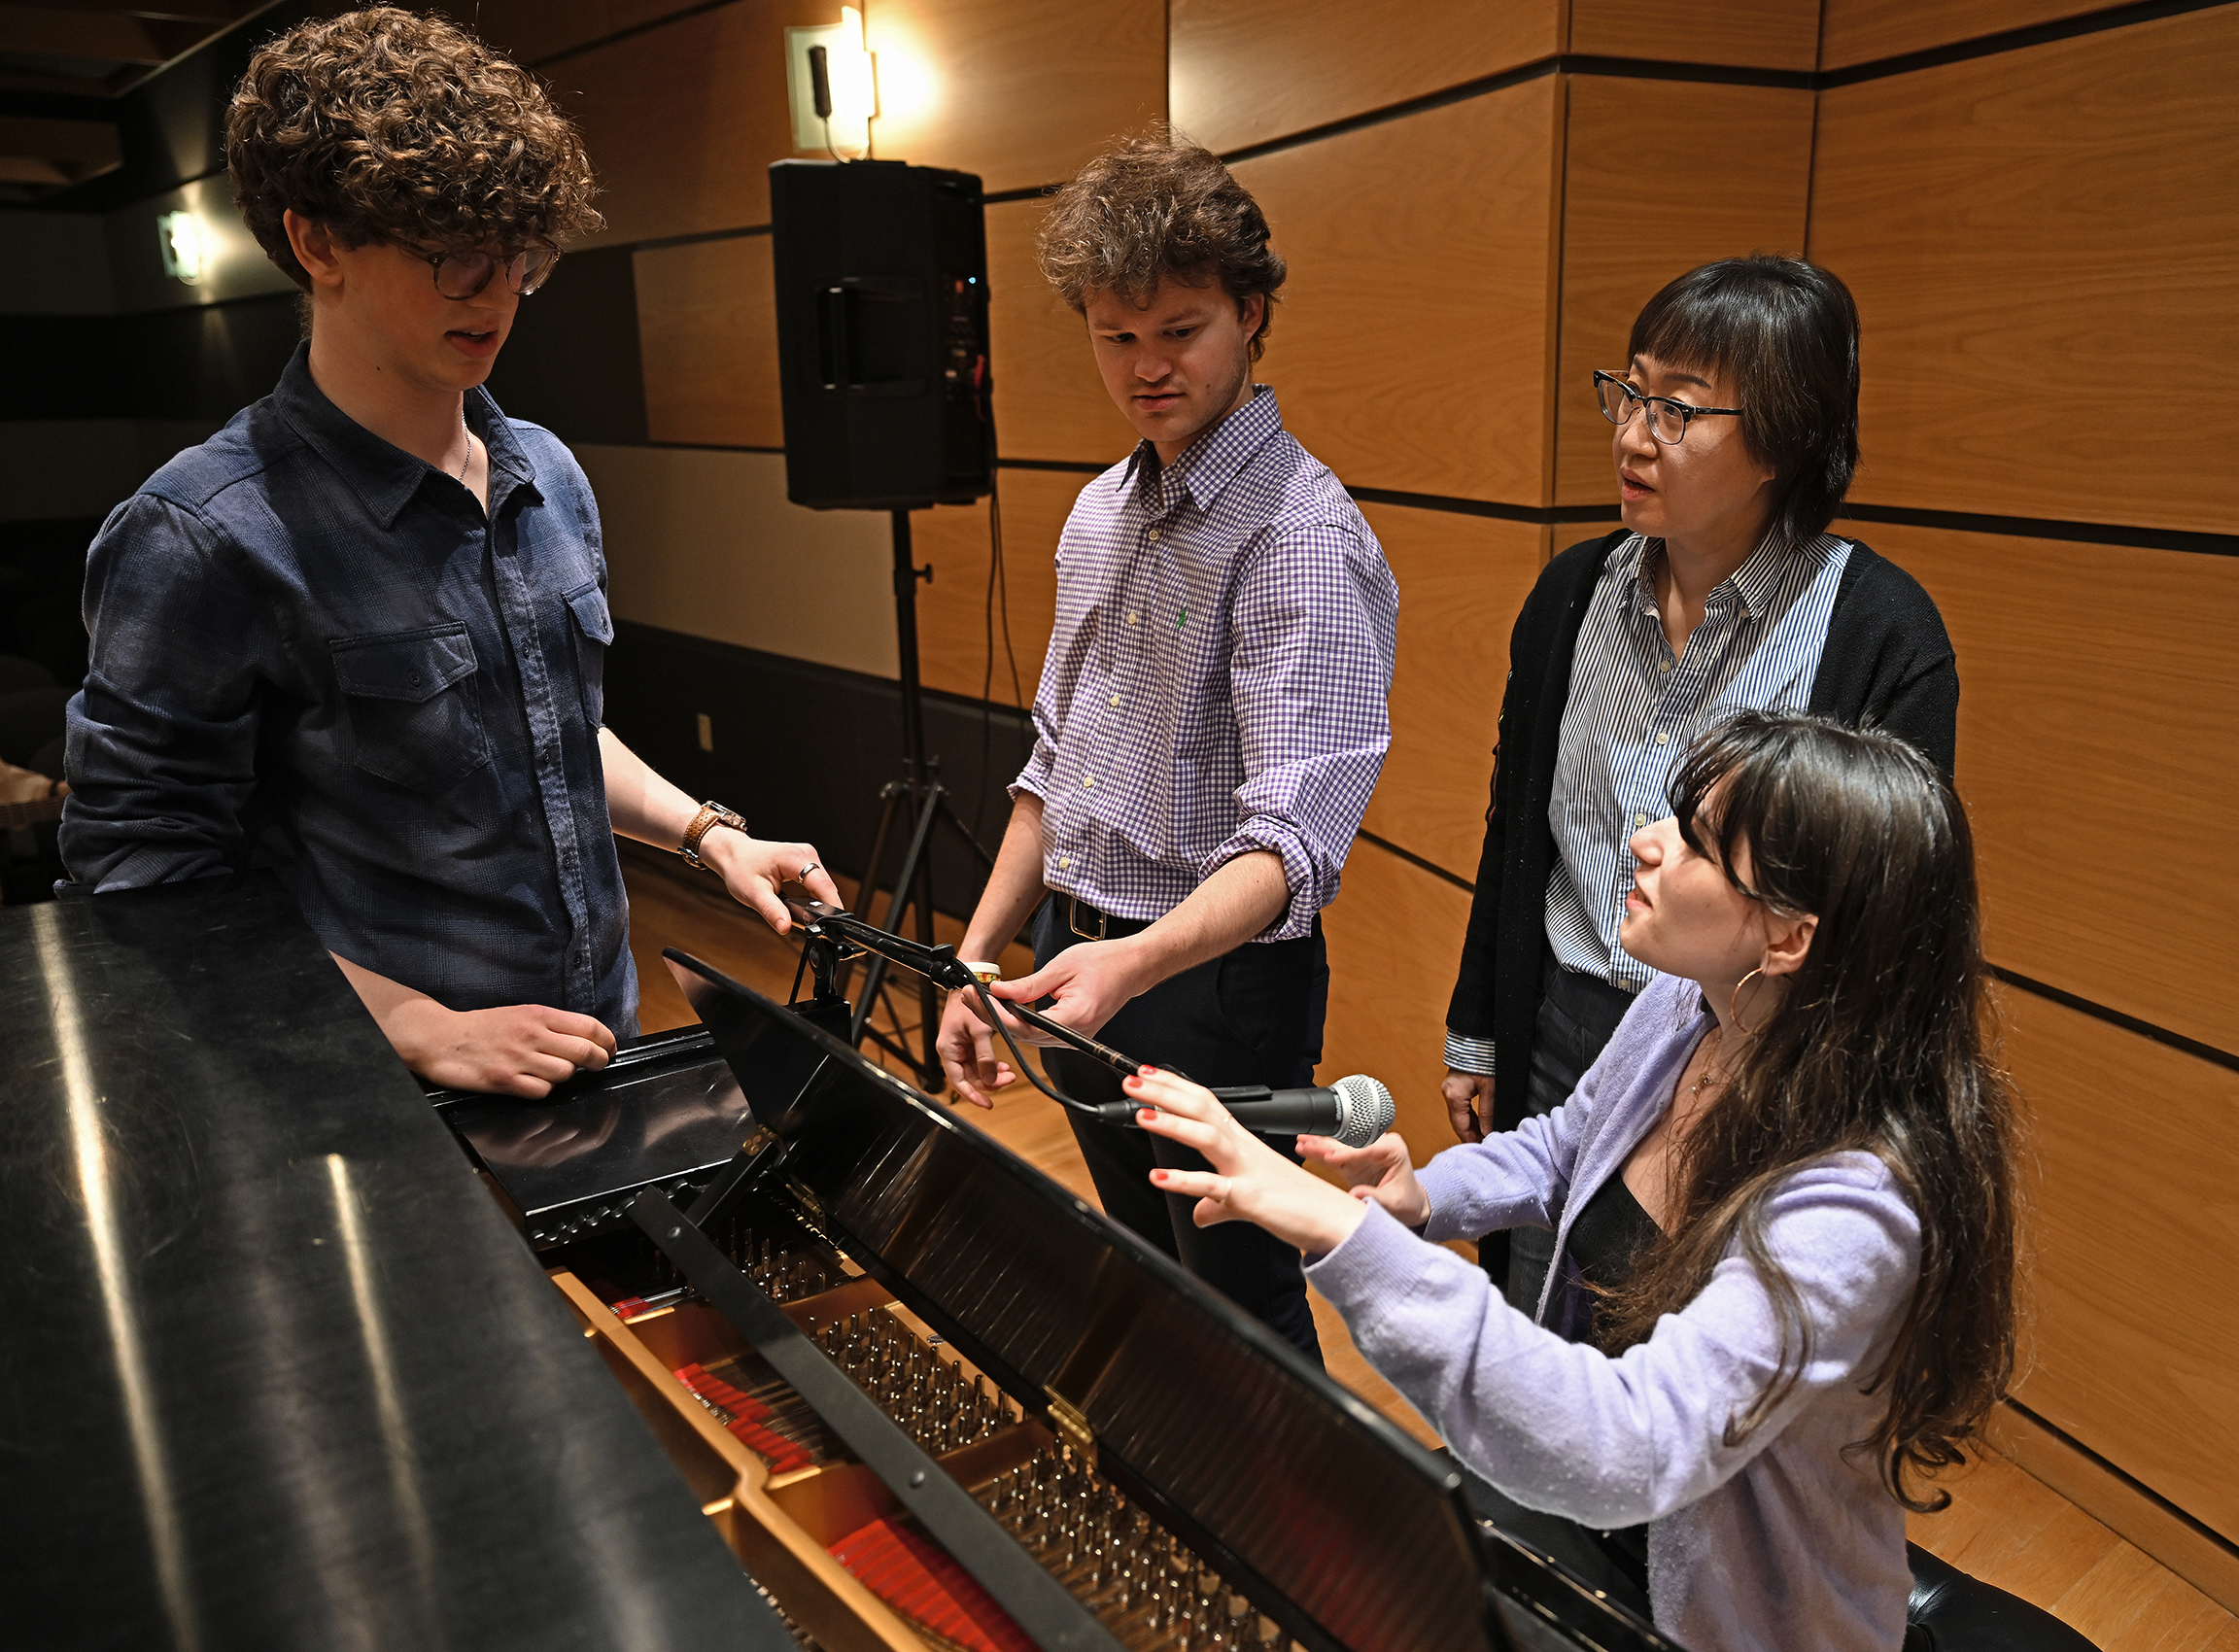 Musicians help one seated at the piano set up a microphone